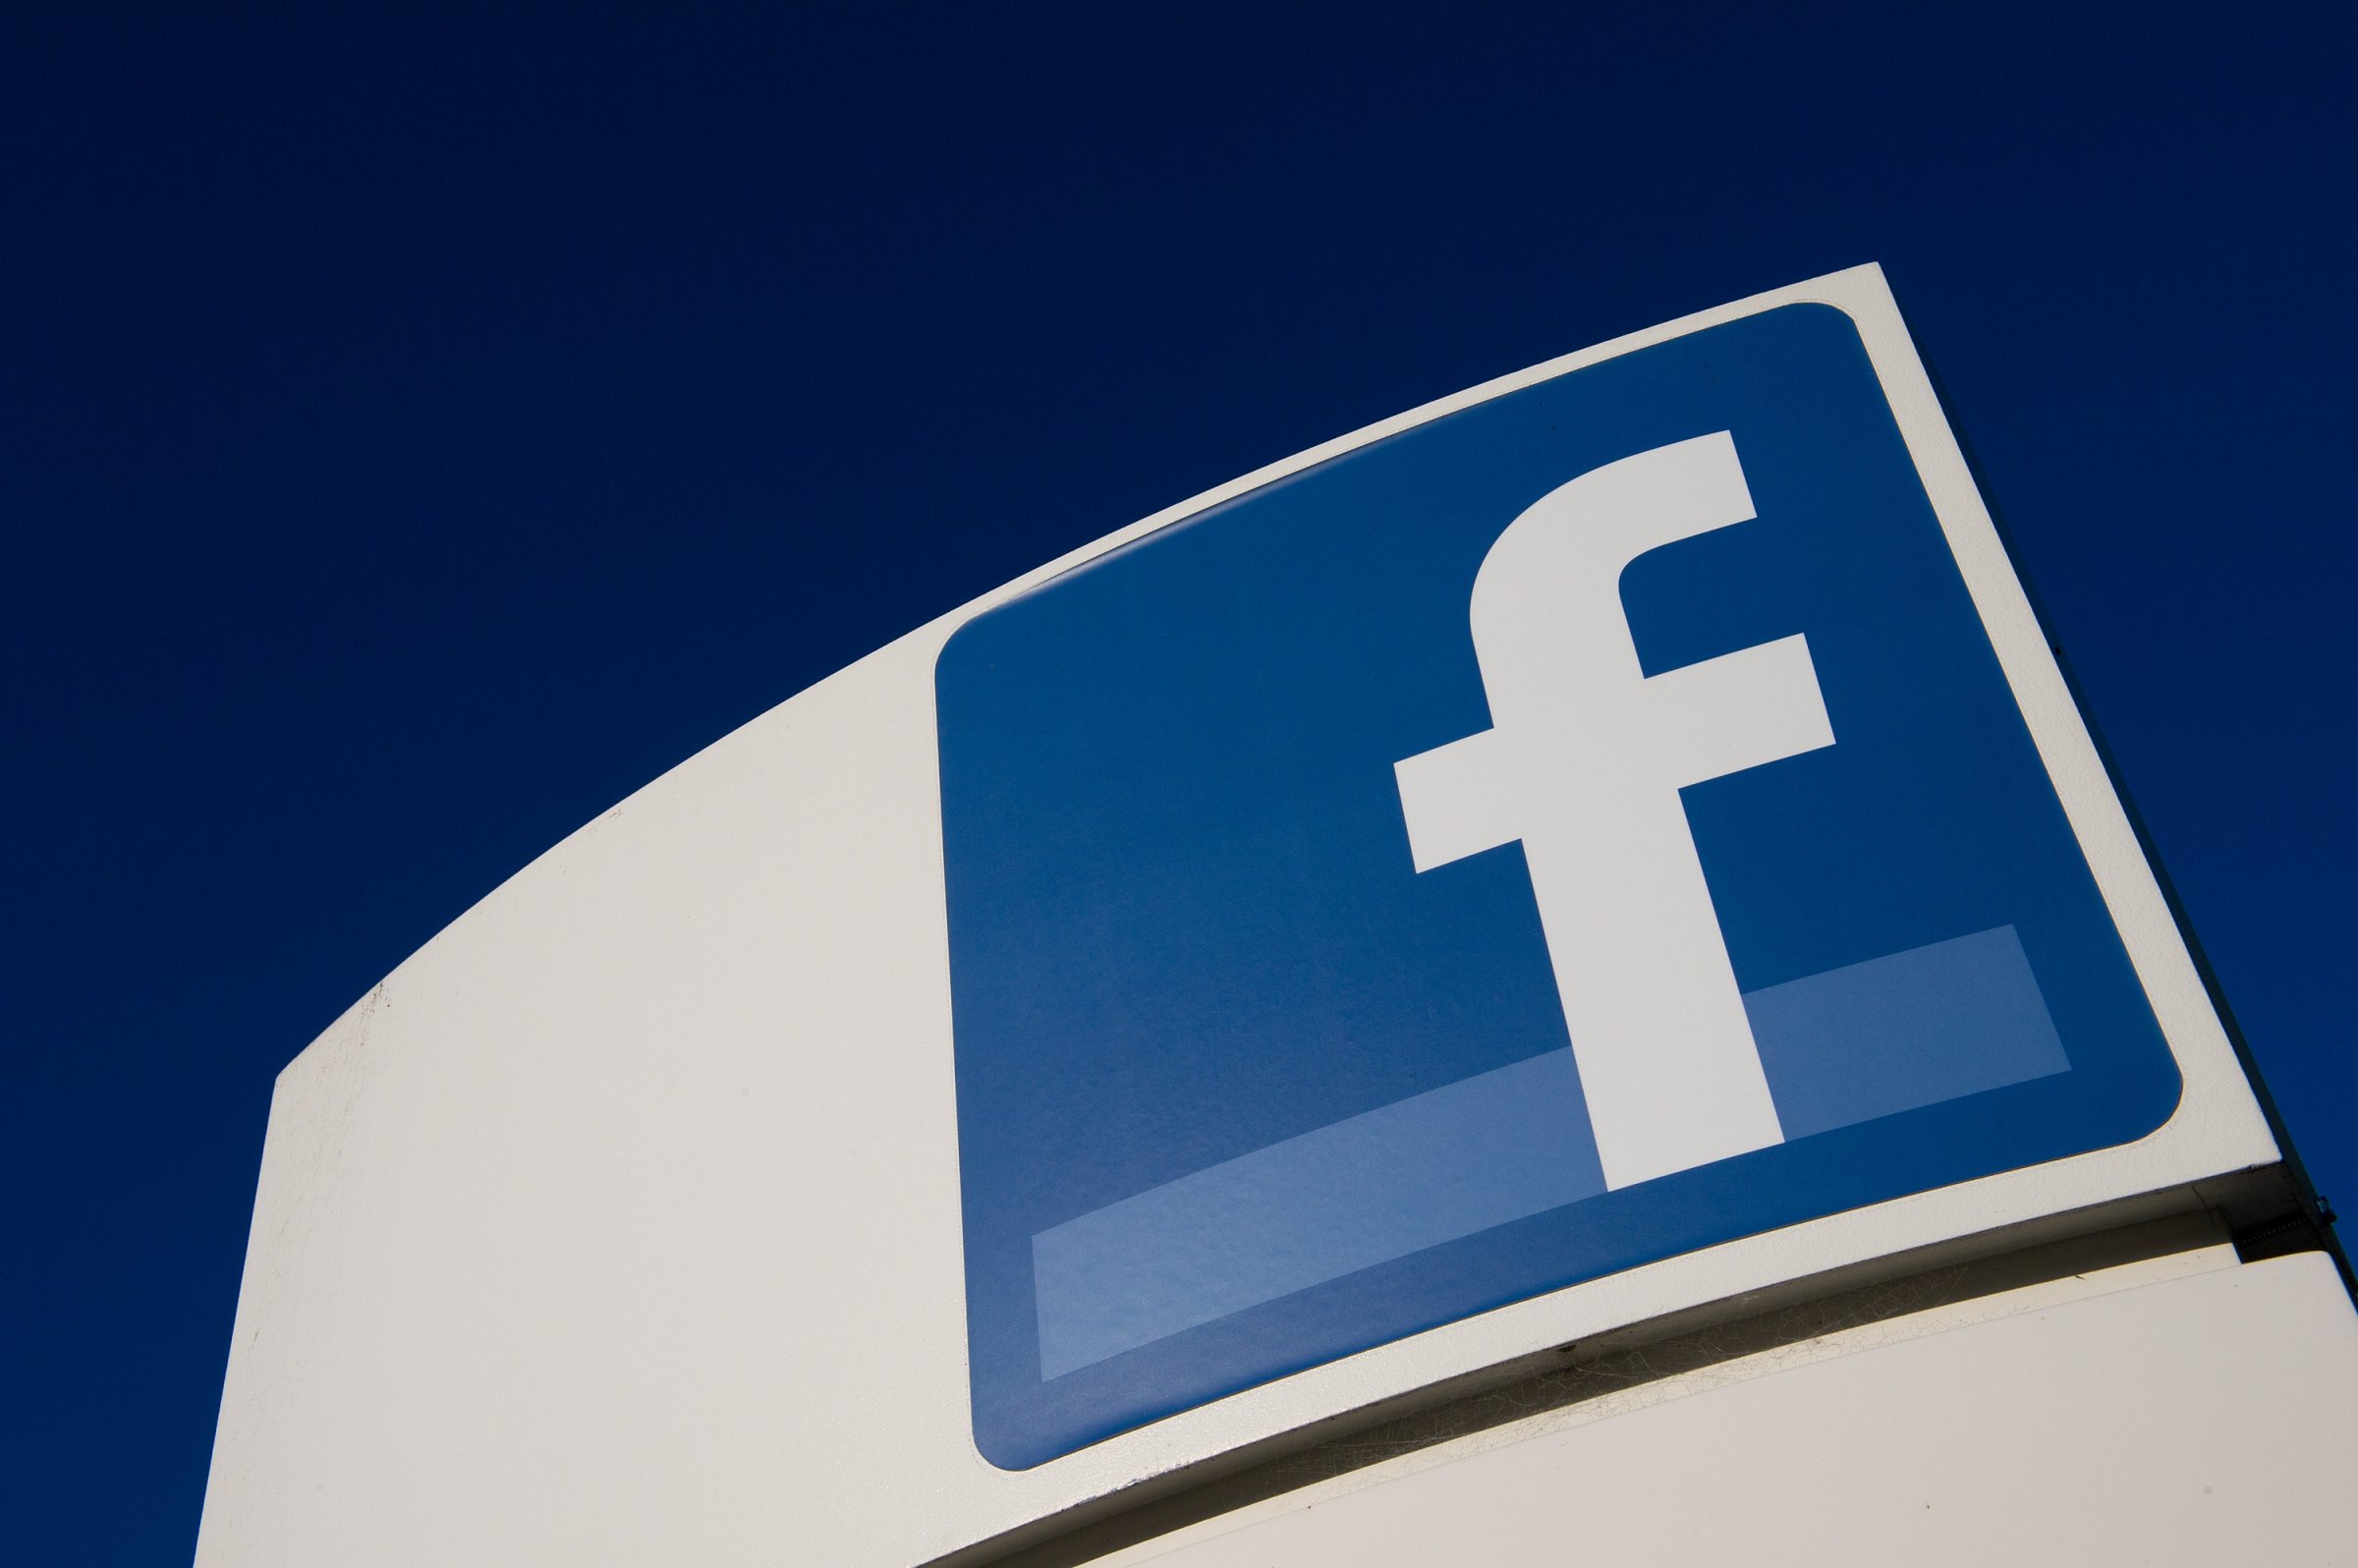 Facebook Inc. signage is displayed outside the company's new campus in Menlo Park, California, U.S., on Friday, Dec. 2, 2011.